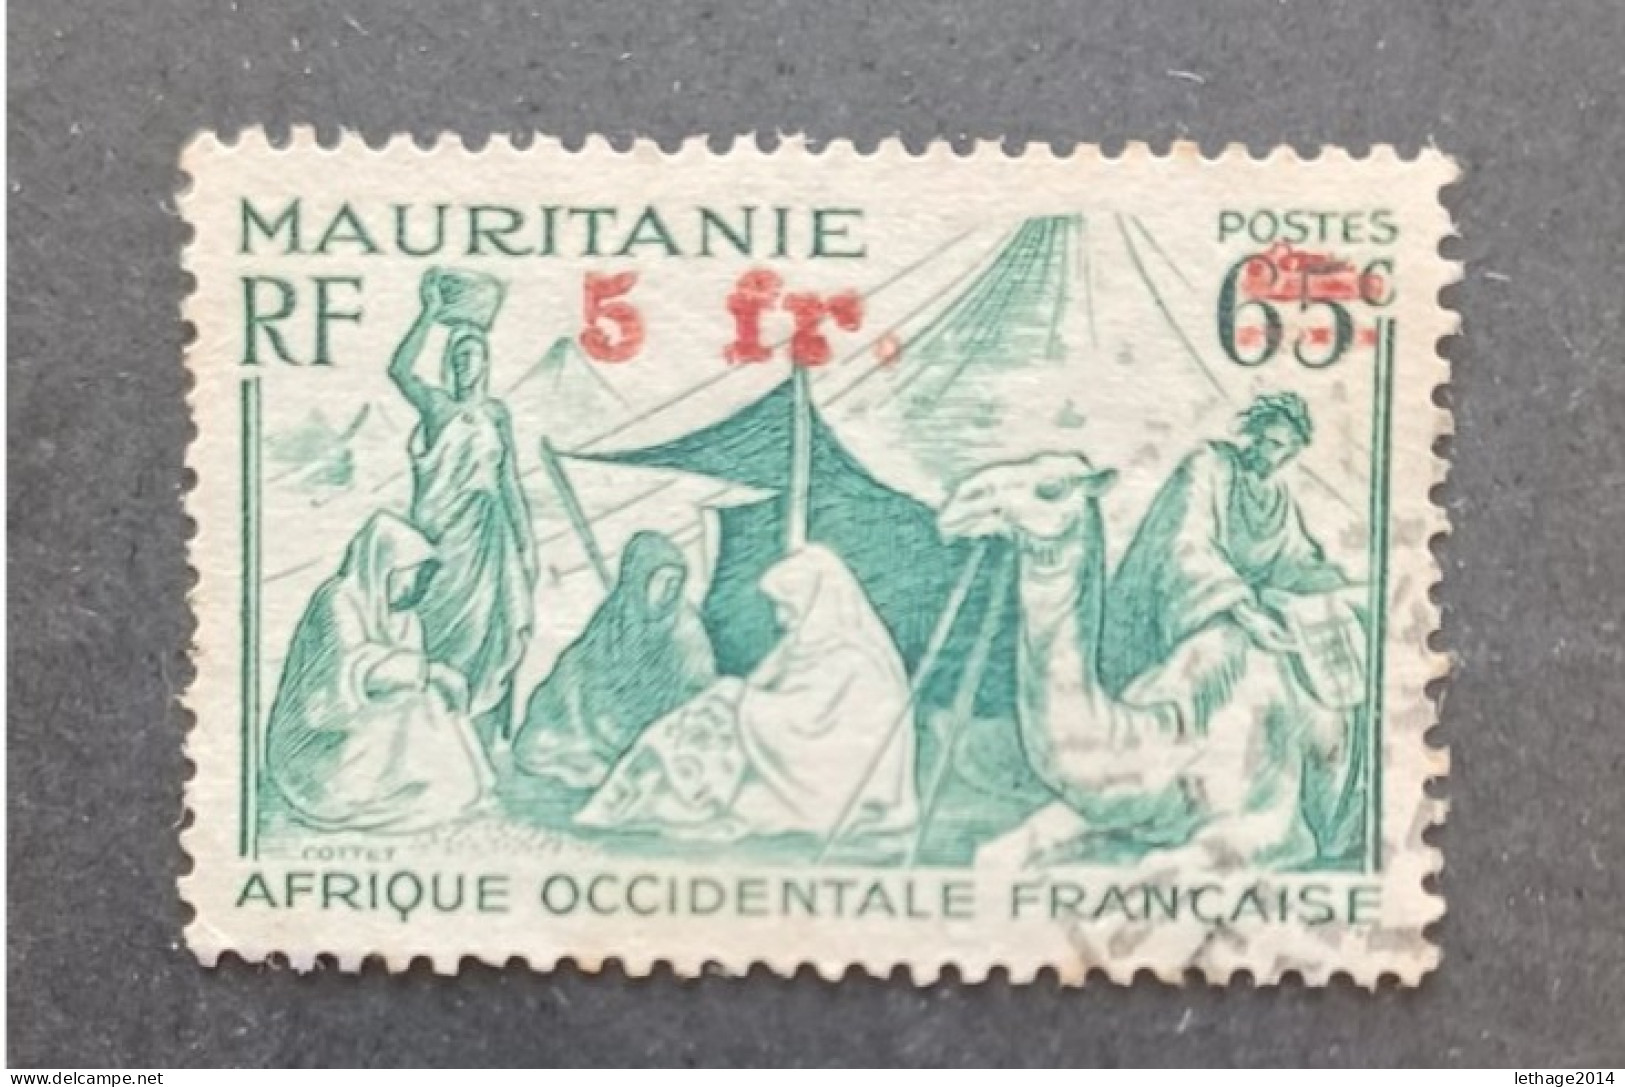 COLONIE FRANCE MAURITANIE 1944 NOMADES CAT YVERT N 135 VARIETY OVERPRINT TRIPLE STRETCH TO THE RIGHT - Used Stamps